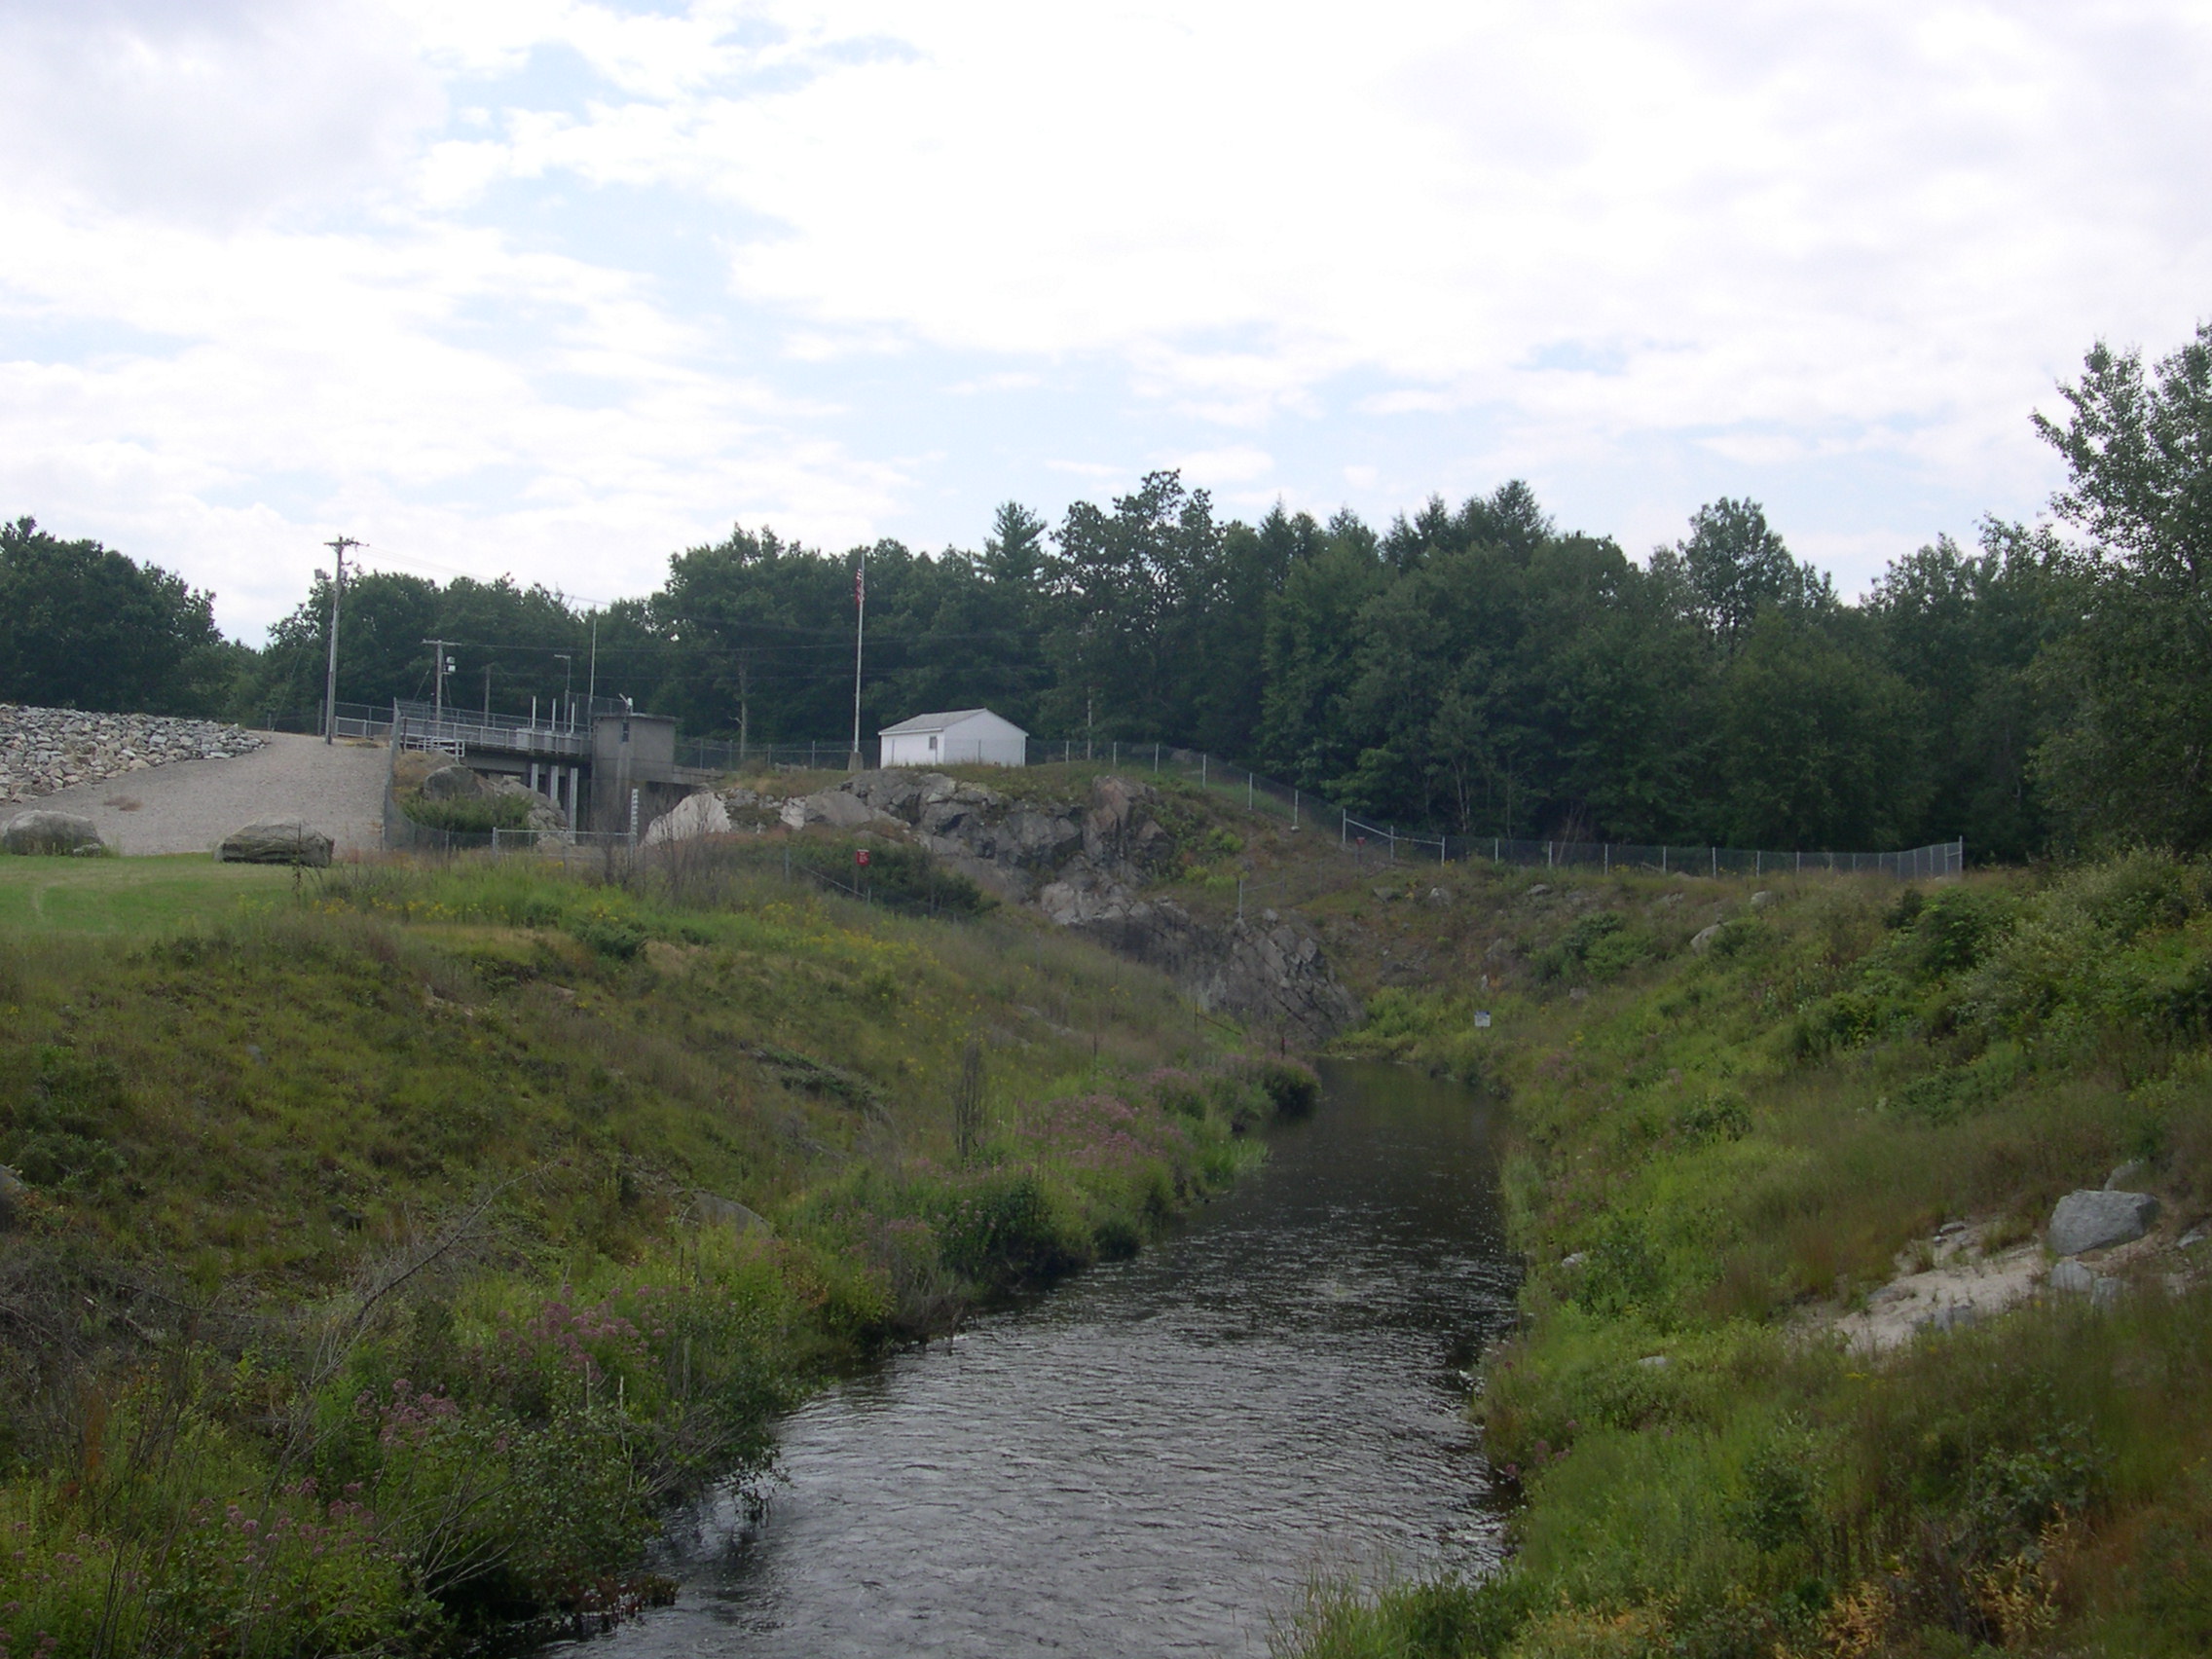 Photograph of the West River, just upstream of the West Hill Dam, Uxbridge, MA